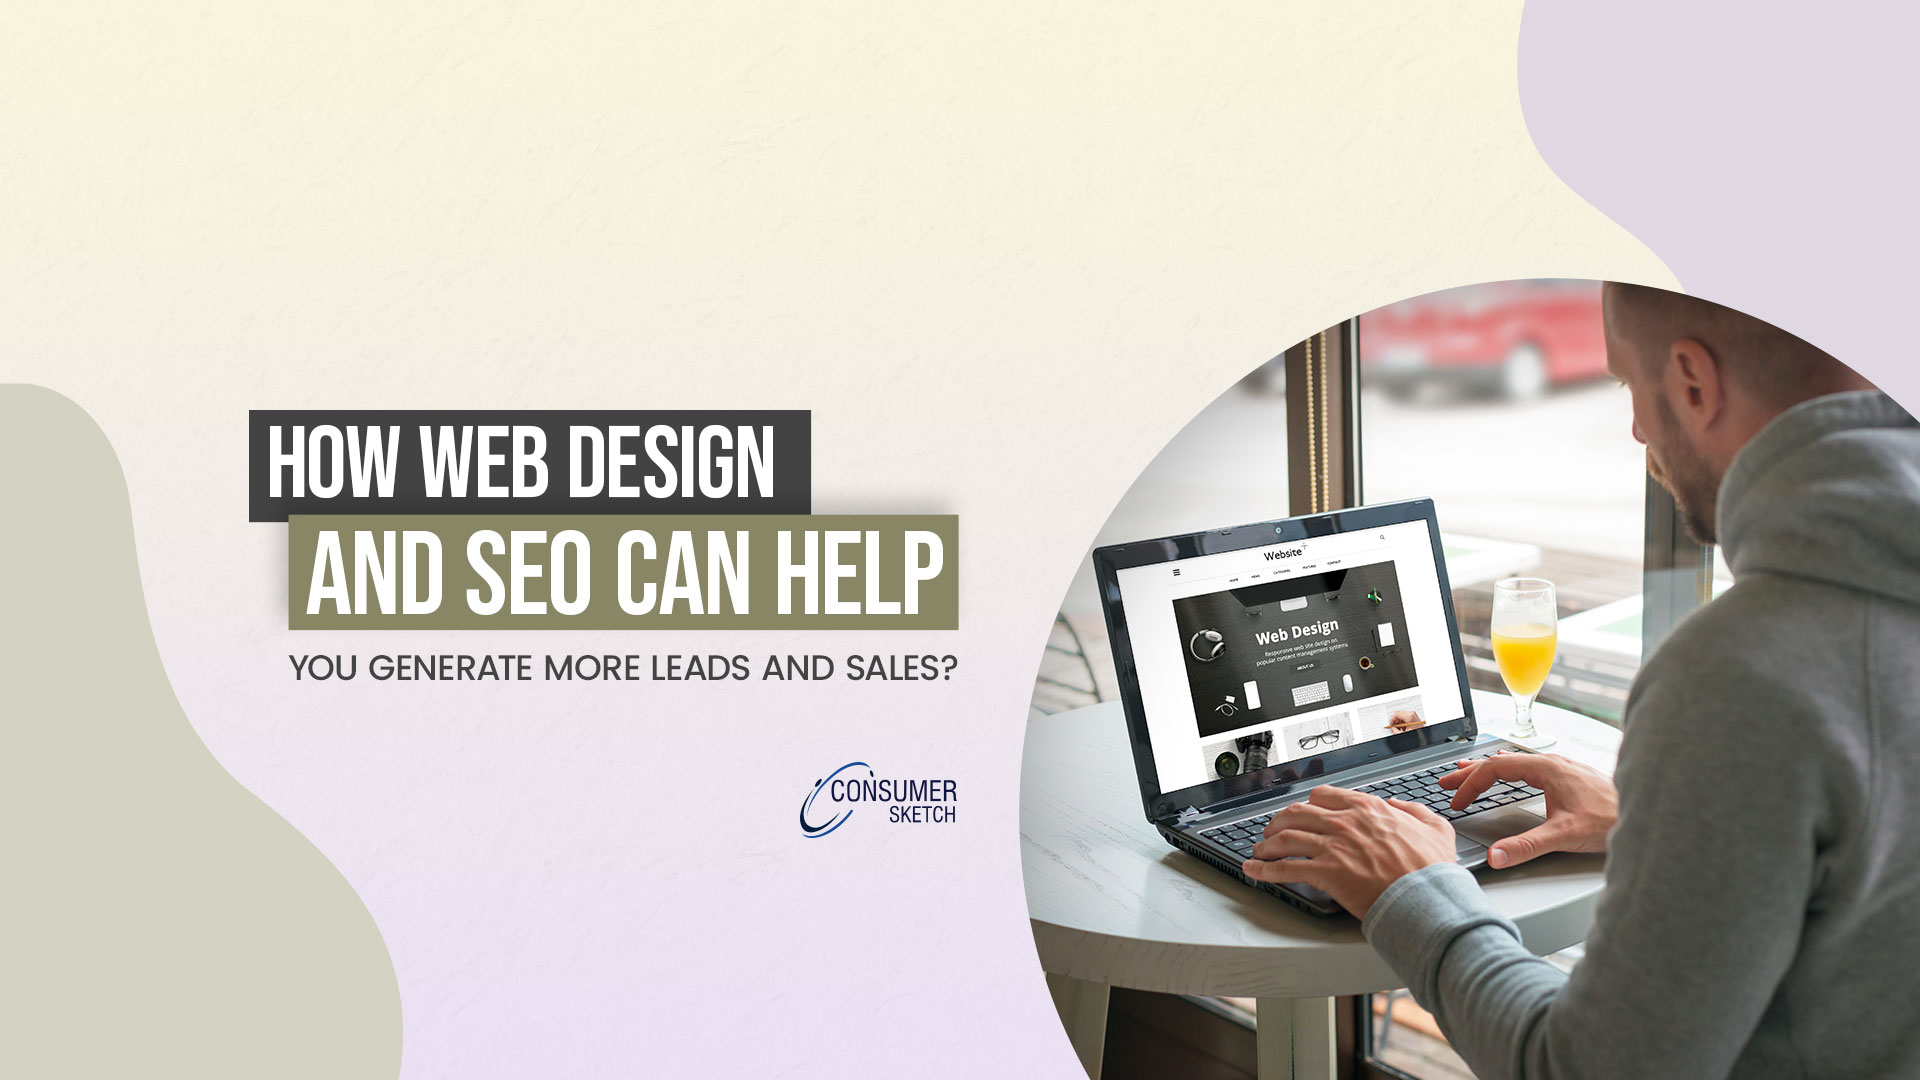 How Web Design and SEO Can Help You Generate More Leads and Sales?